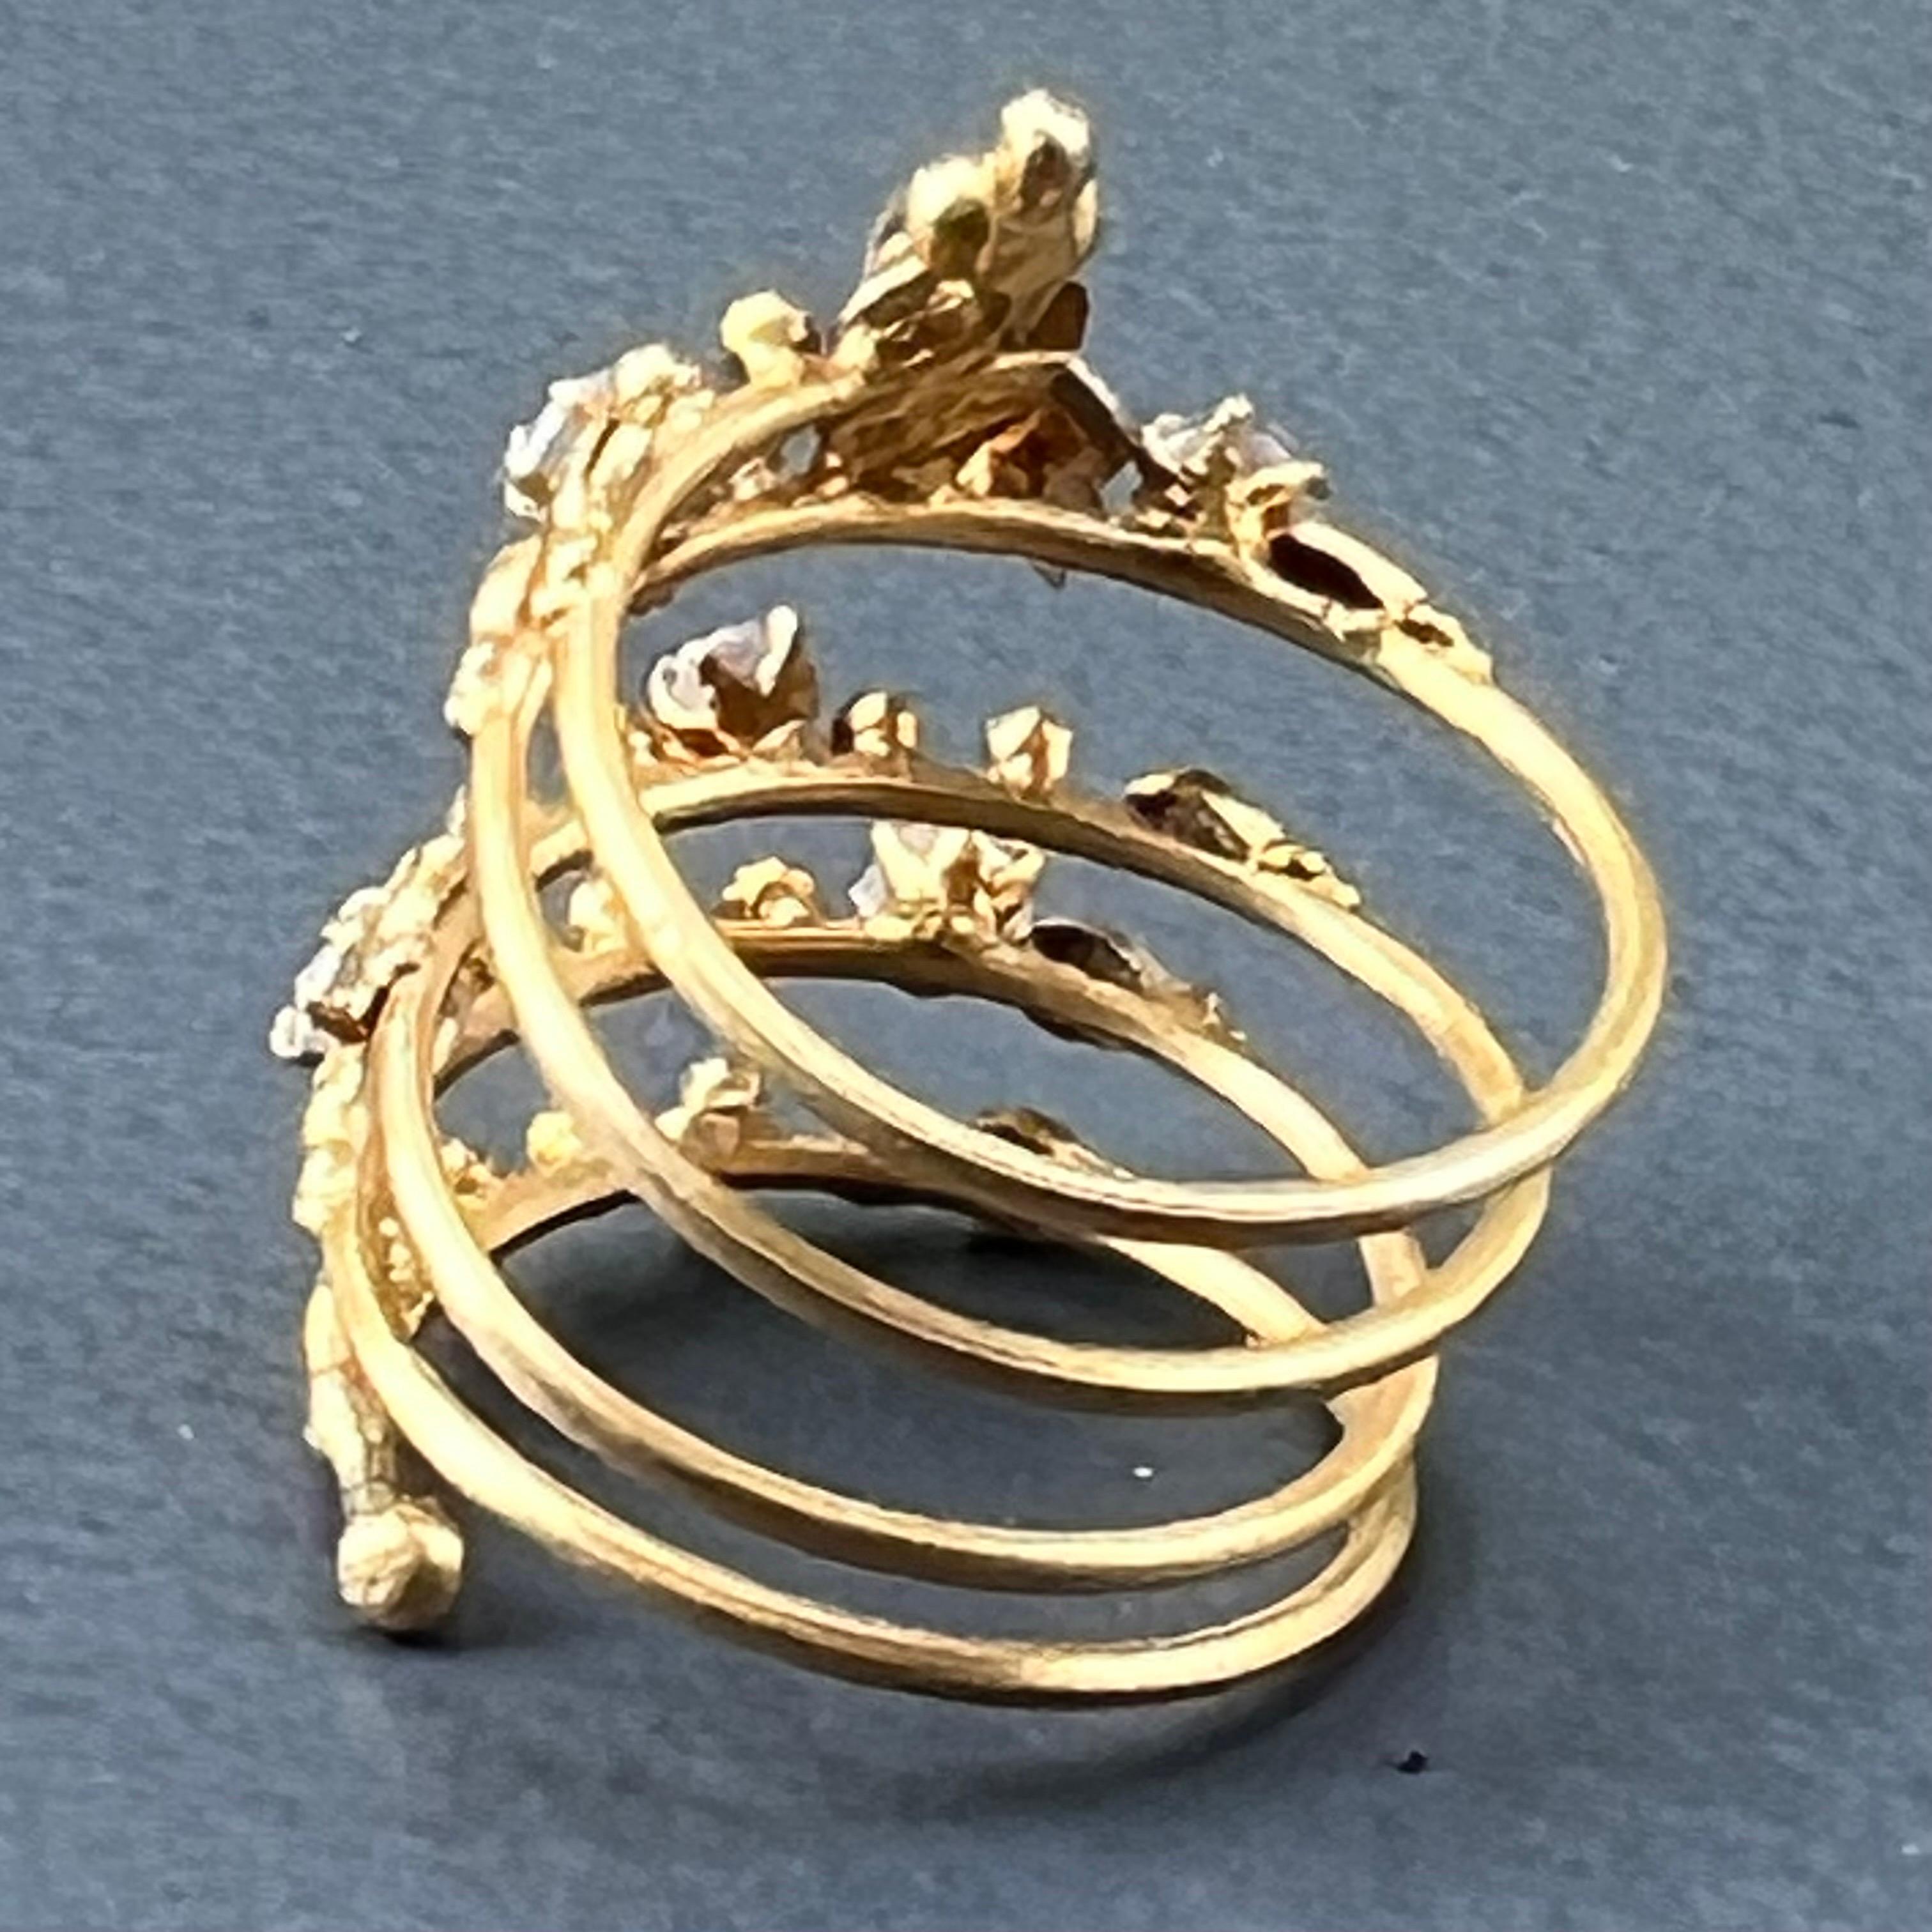 23 Karat solid gold coiled Ring Handmade Jewelry  In Good Condition For Sale In Plainsboro, NJ